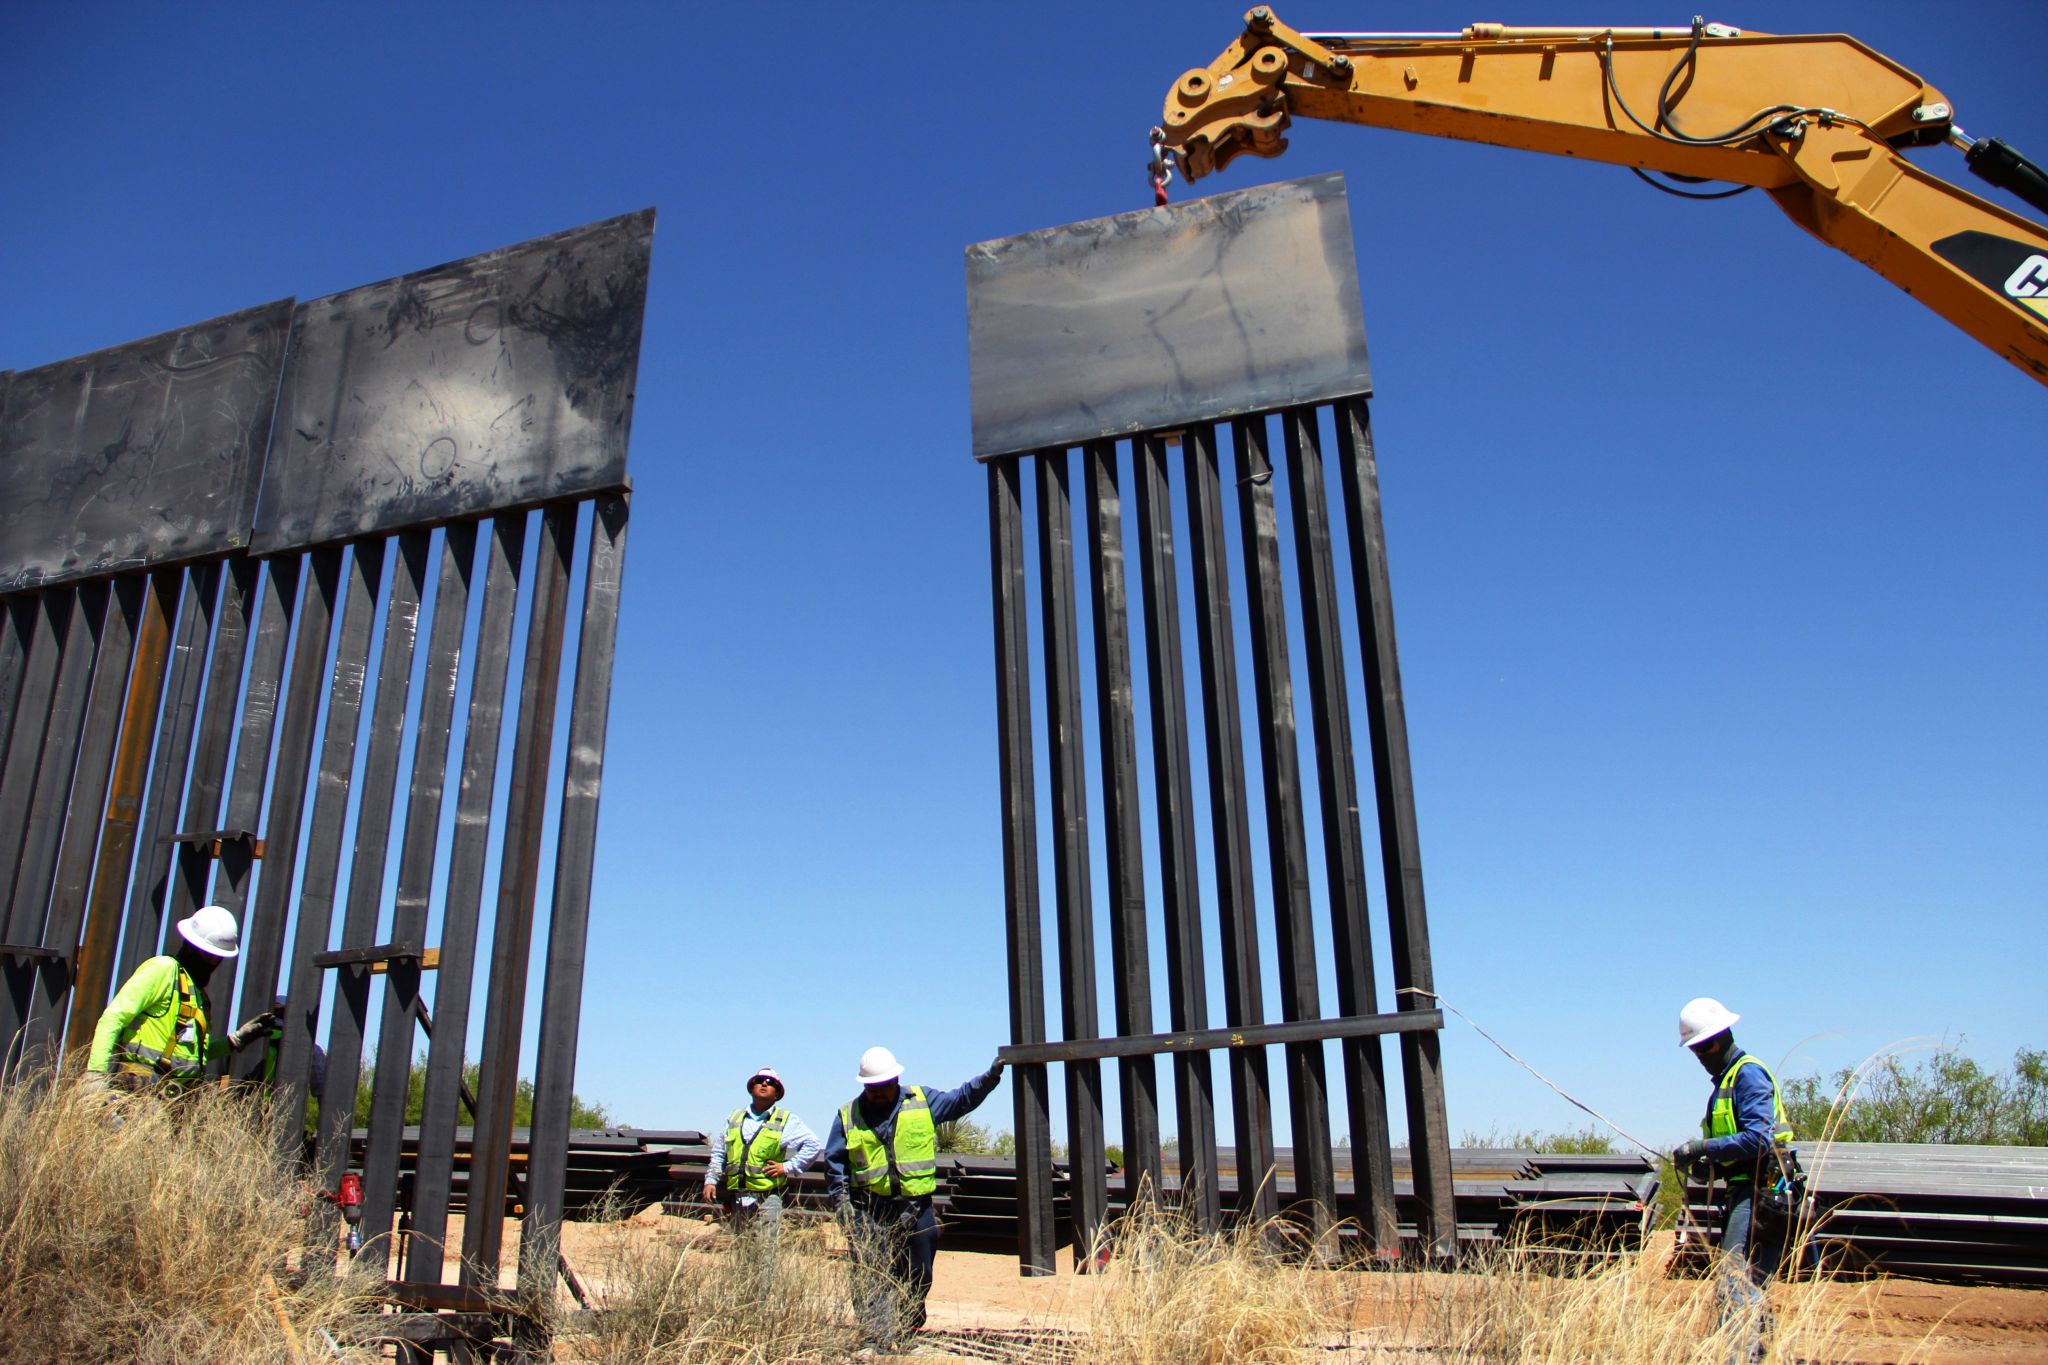 After 245,000 Illegal Entries Biden Approves Building Trumps Border Wall